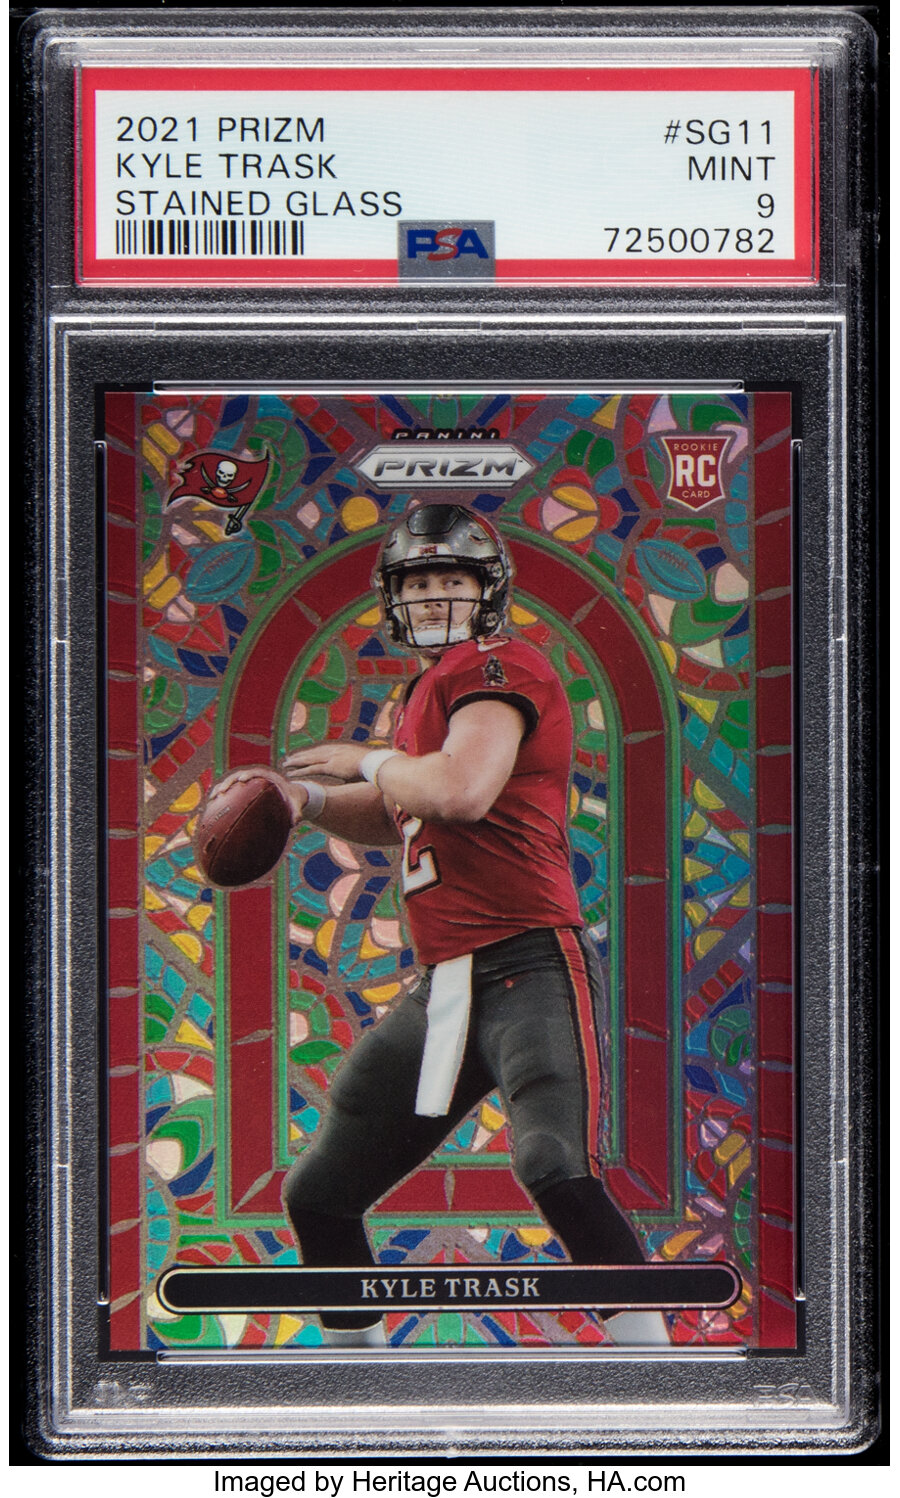 2021 Panini Prizm Kyle Trask (Stained Glass) #SG11 PSA Mint 9